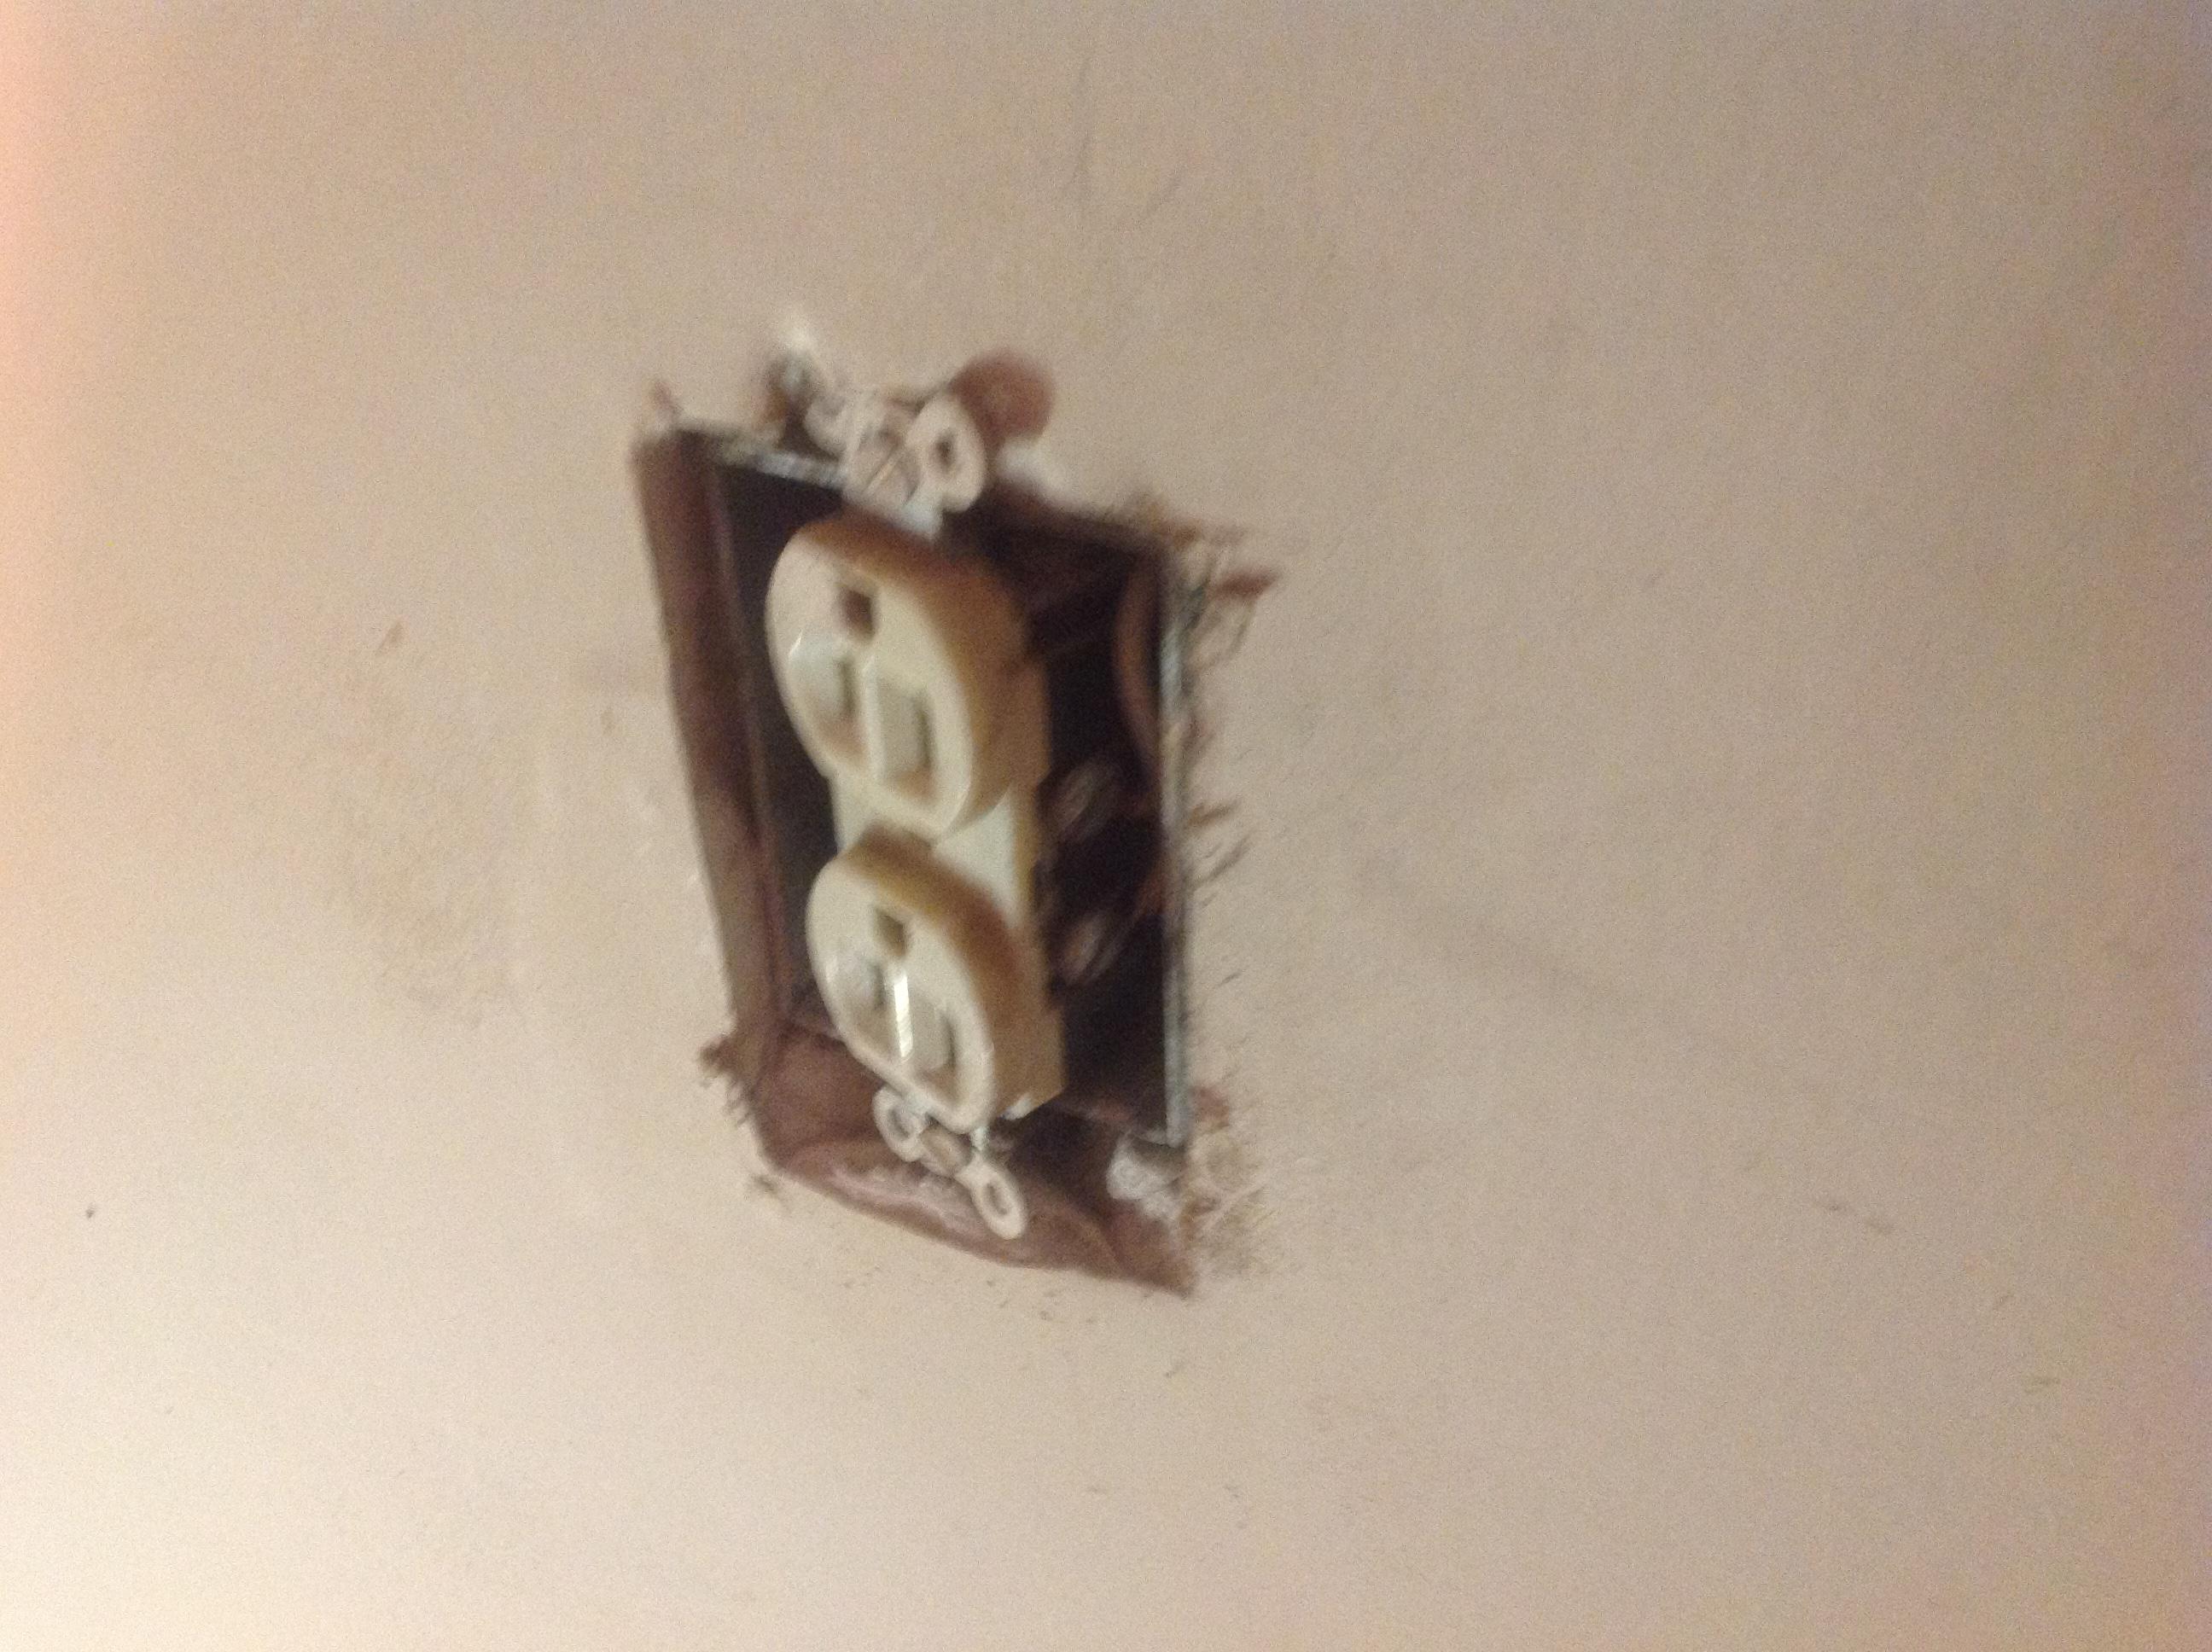 This receptical was missing its cover and is a safety hazard due to possible electrical shock hazard and should be addressed by a professional electrician. Found by Bumgardner Inspection Services in Miamisburg ohio